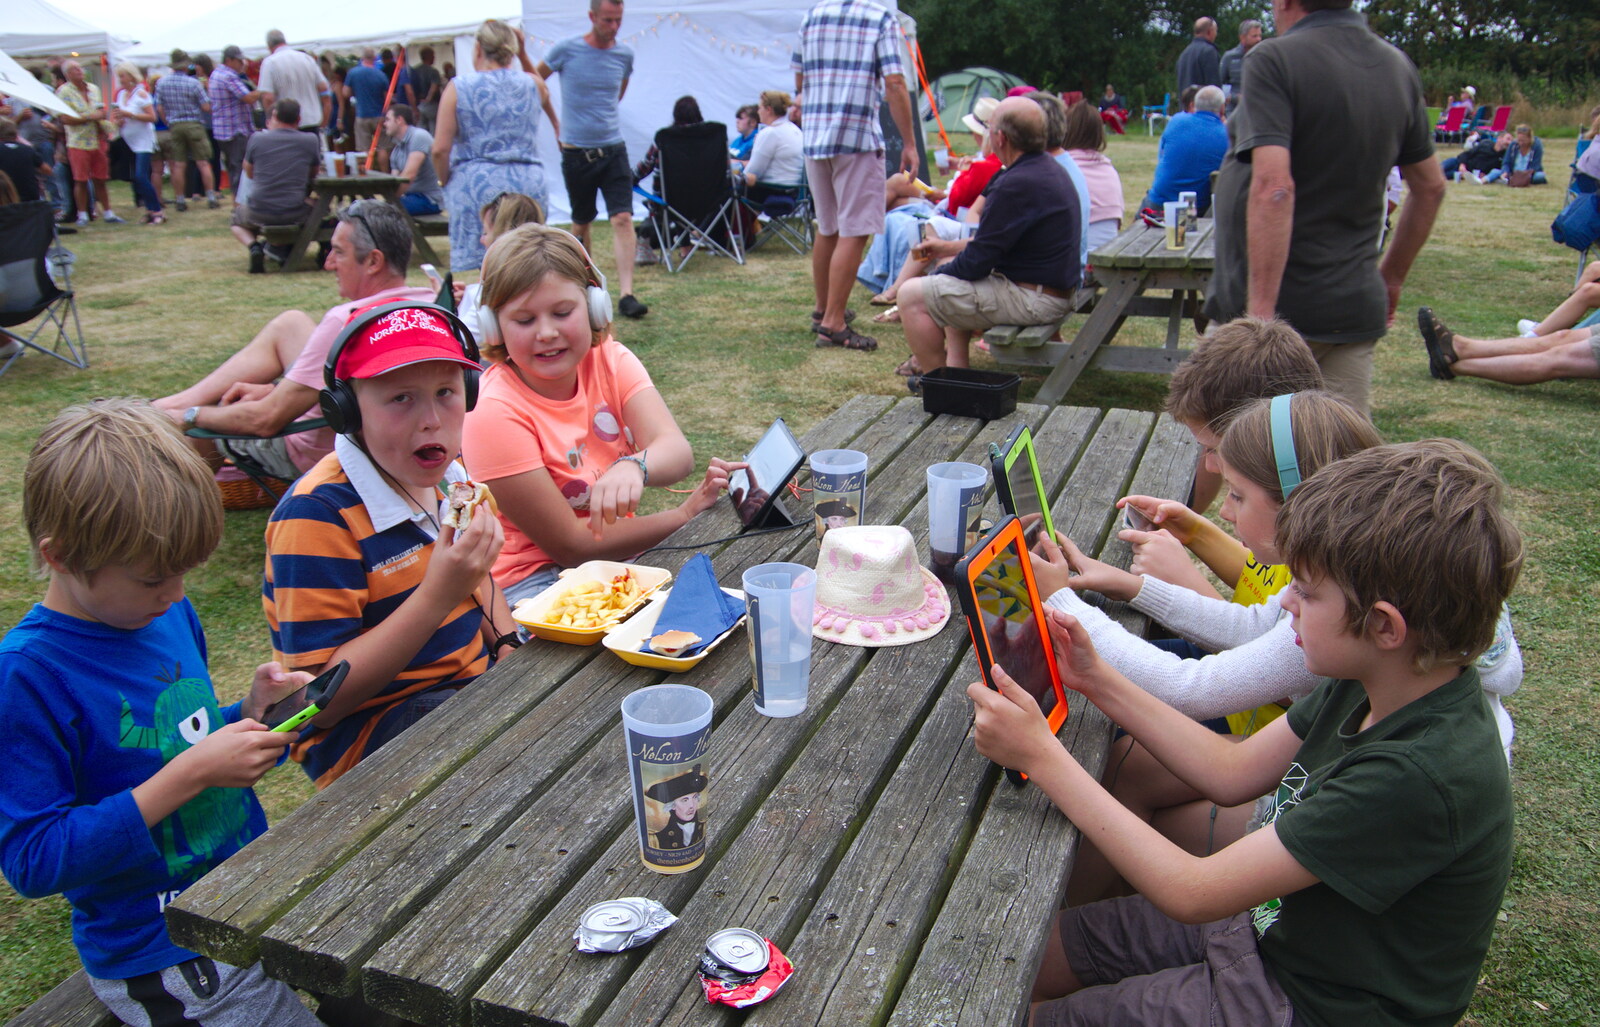 It's device city on the kids' table from Waxham Sands and the Nelson Head Beer Festival, Horsey, Norfolk - 31st August 2019